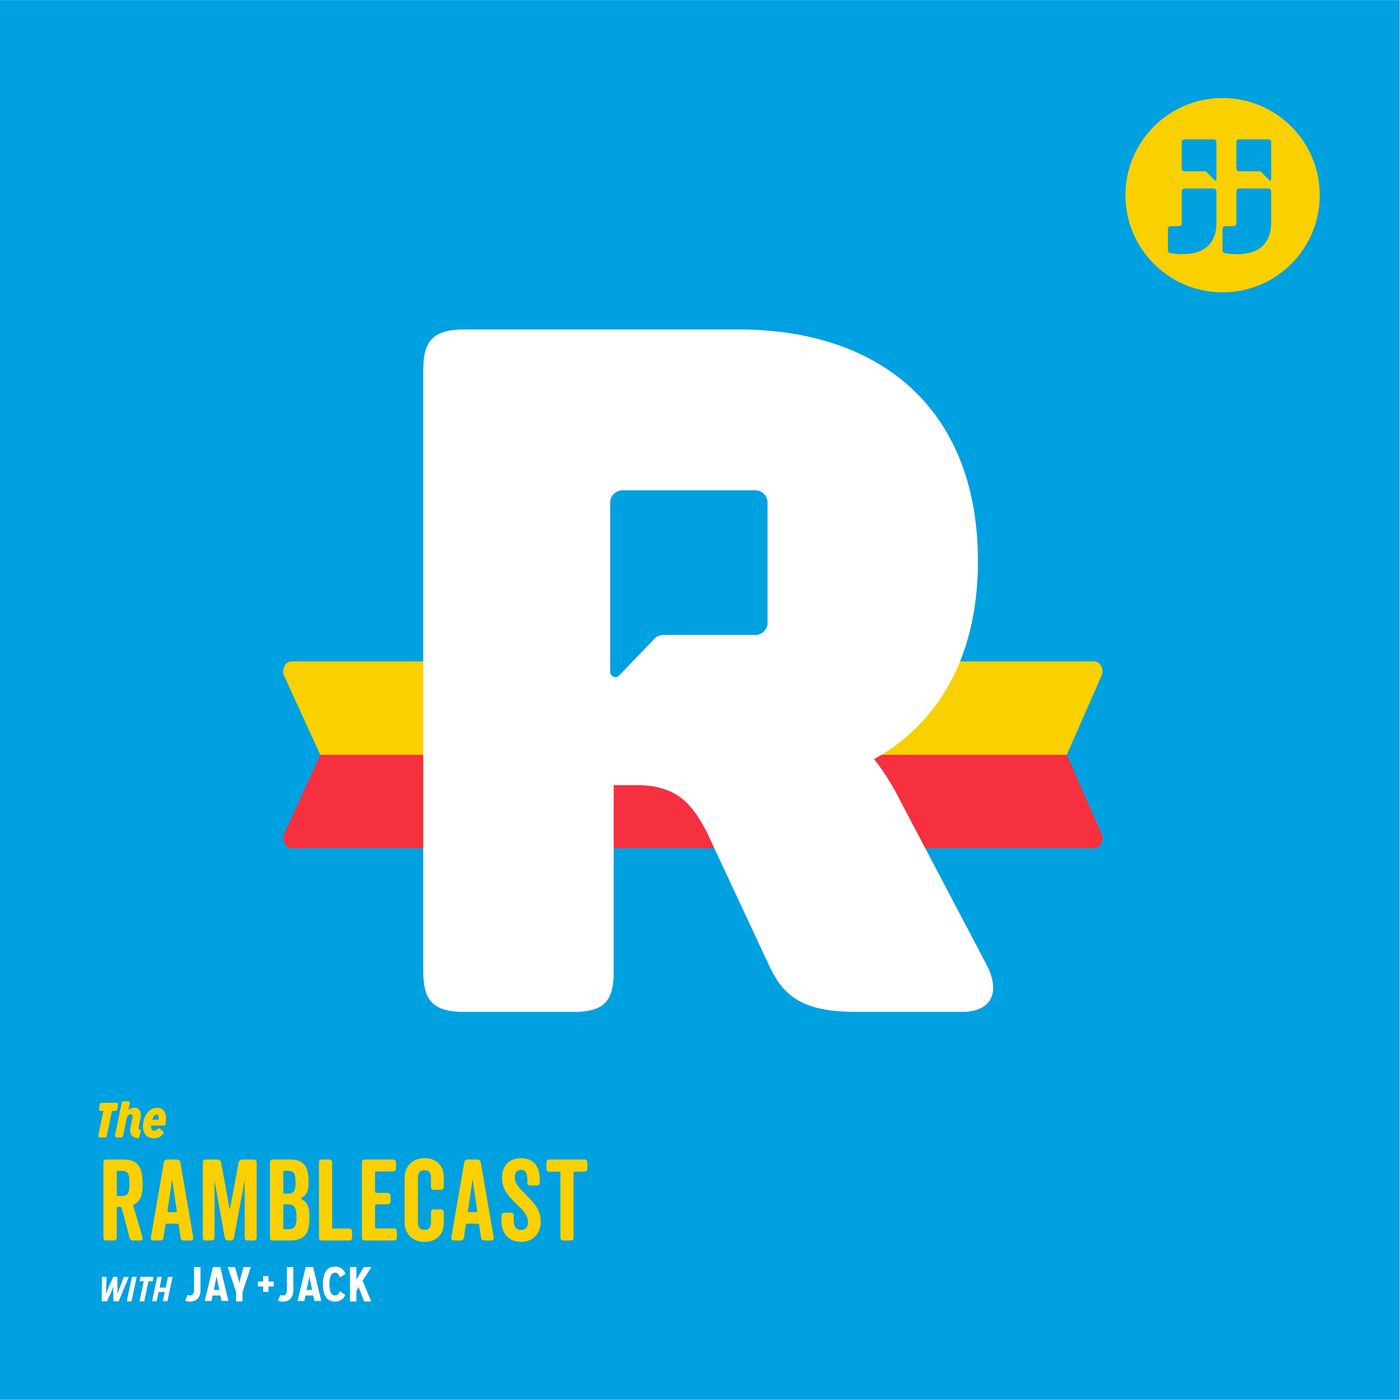 Ramblecast Returns: Jay and Jack are Back!